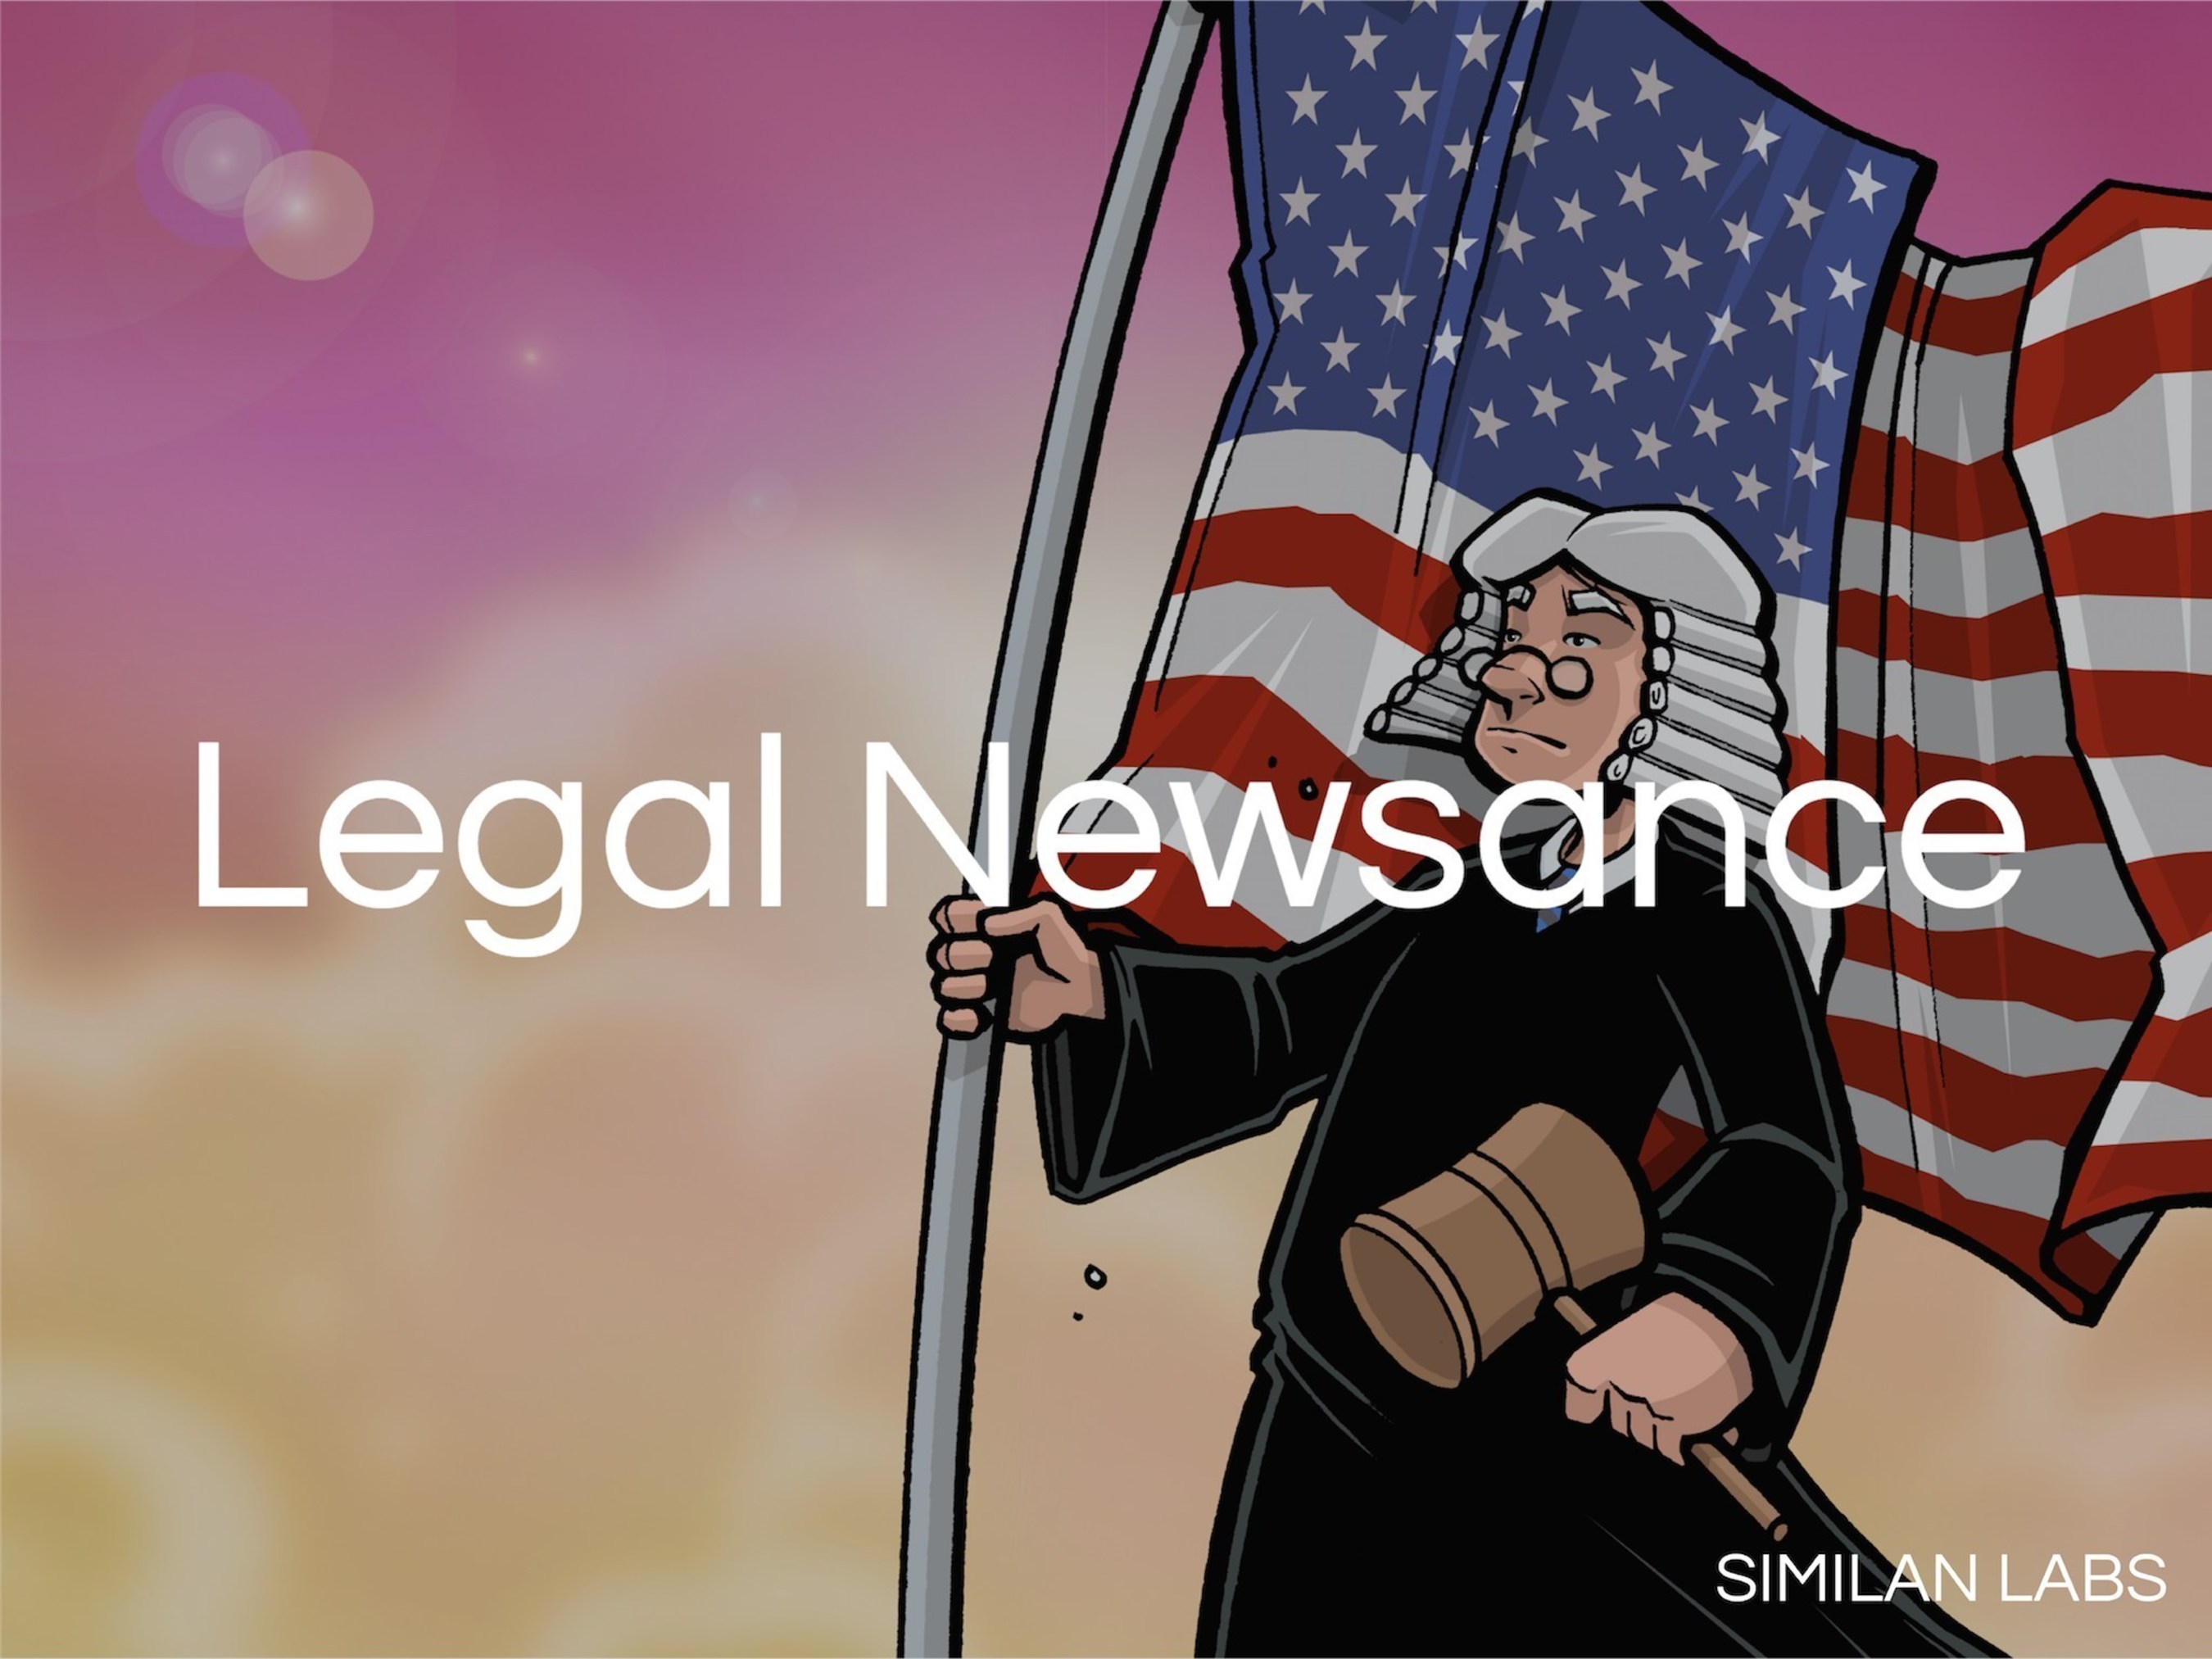 Curated by humans, Legal Newsance delivers current legal news, events, jobs and online law resources to your iPhone, iPad or Android.